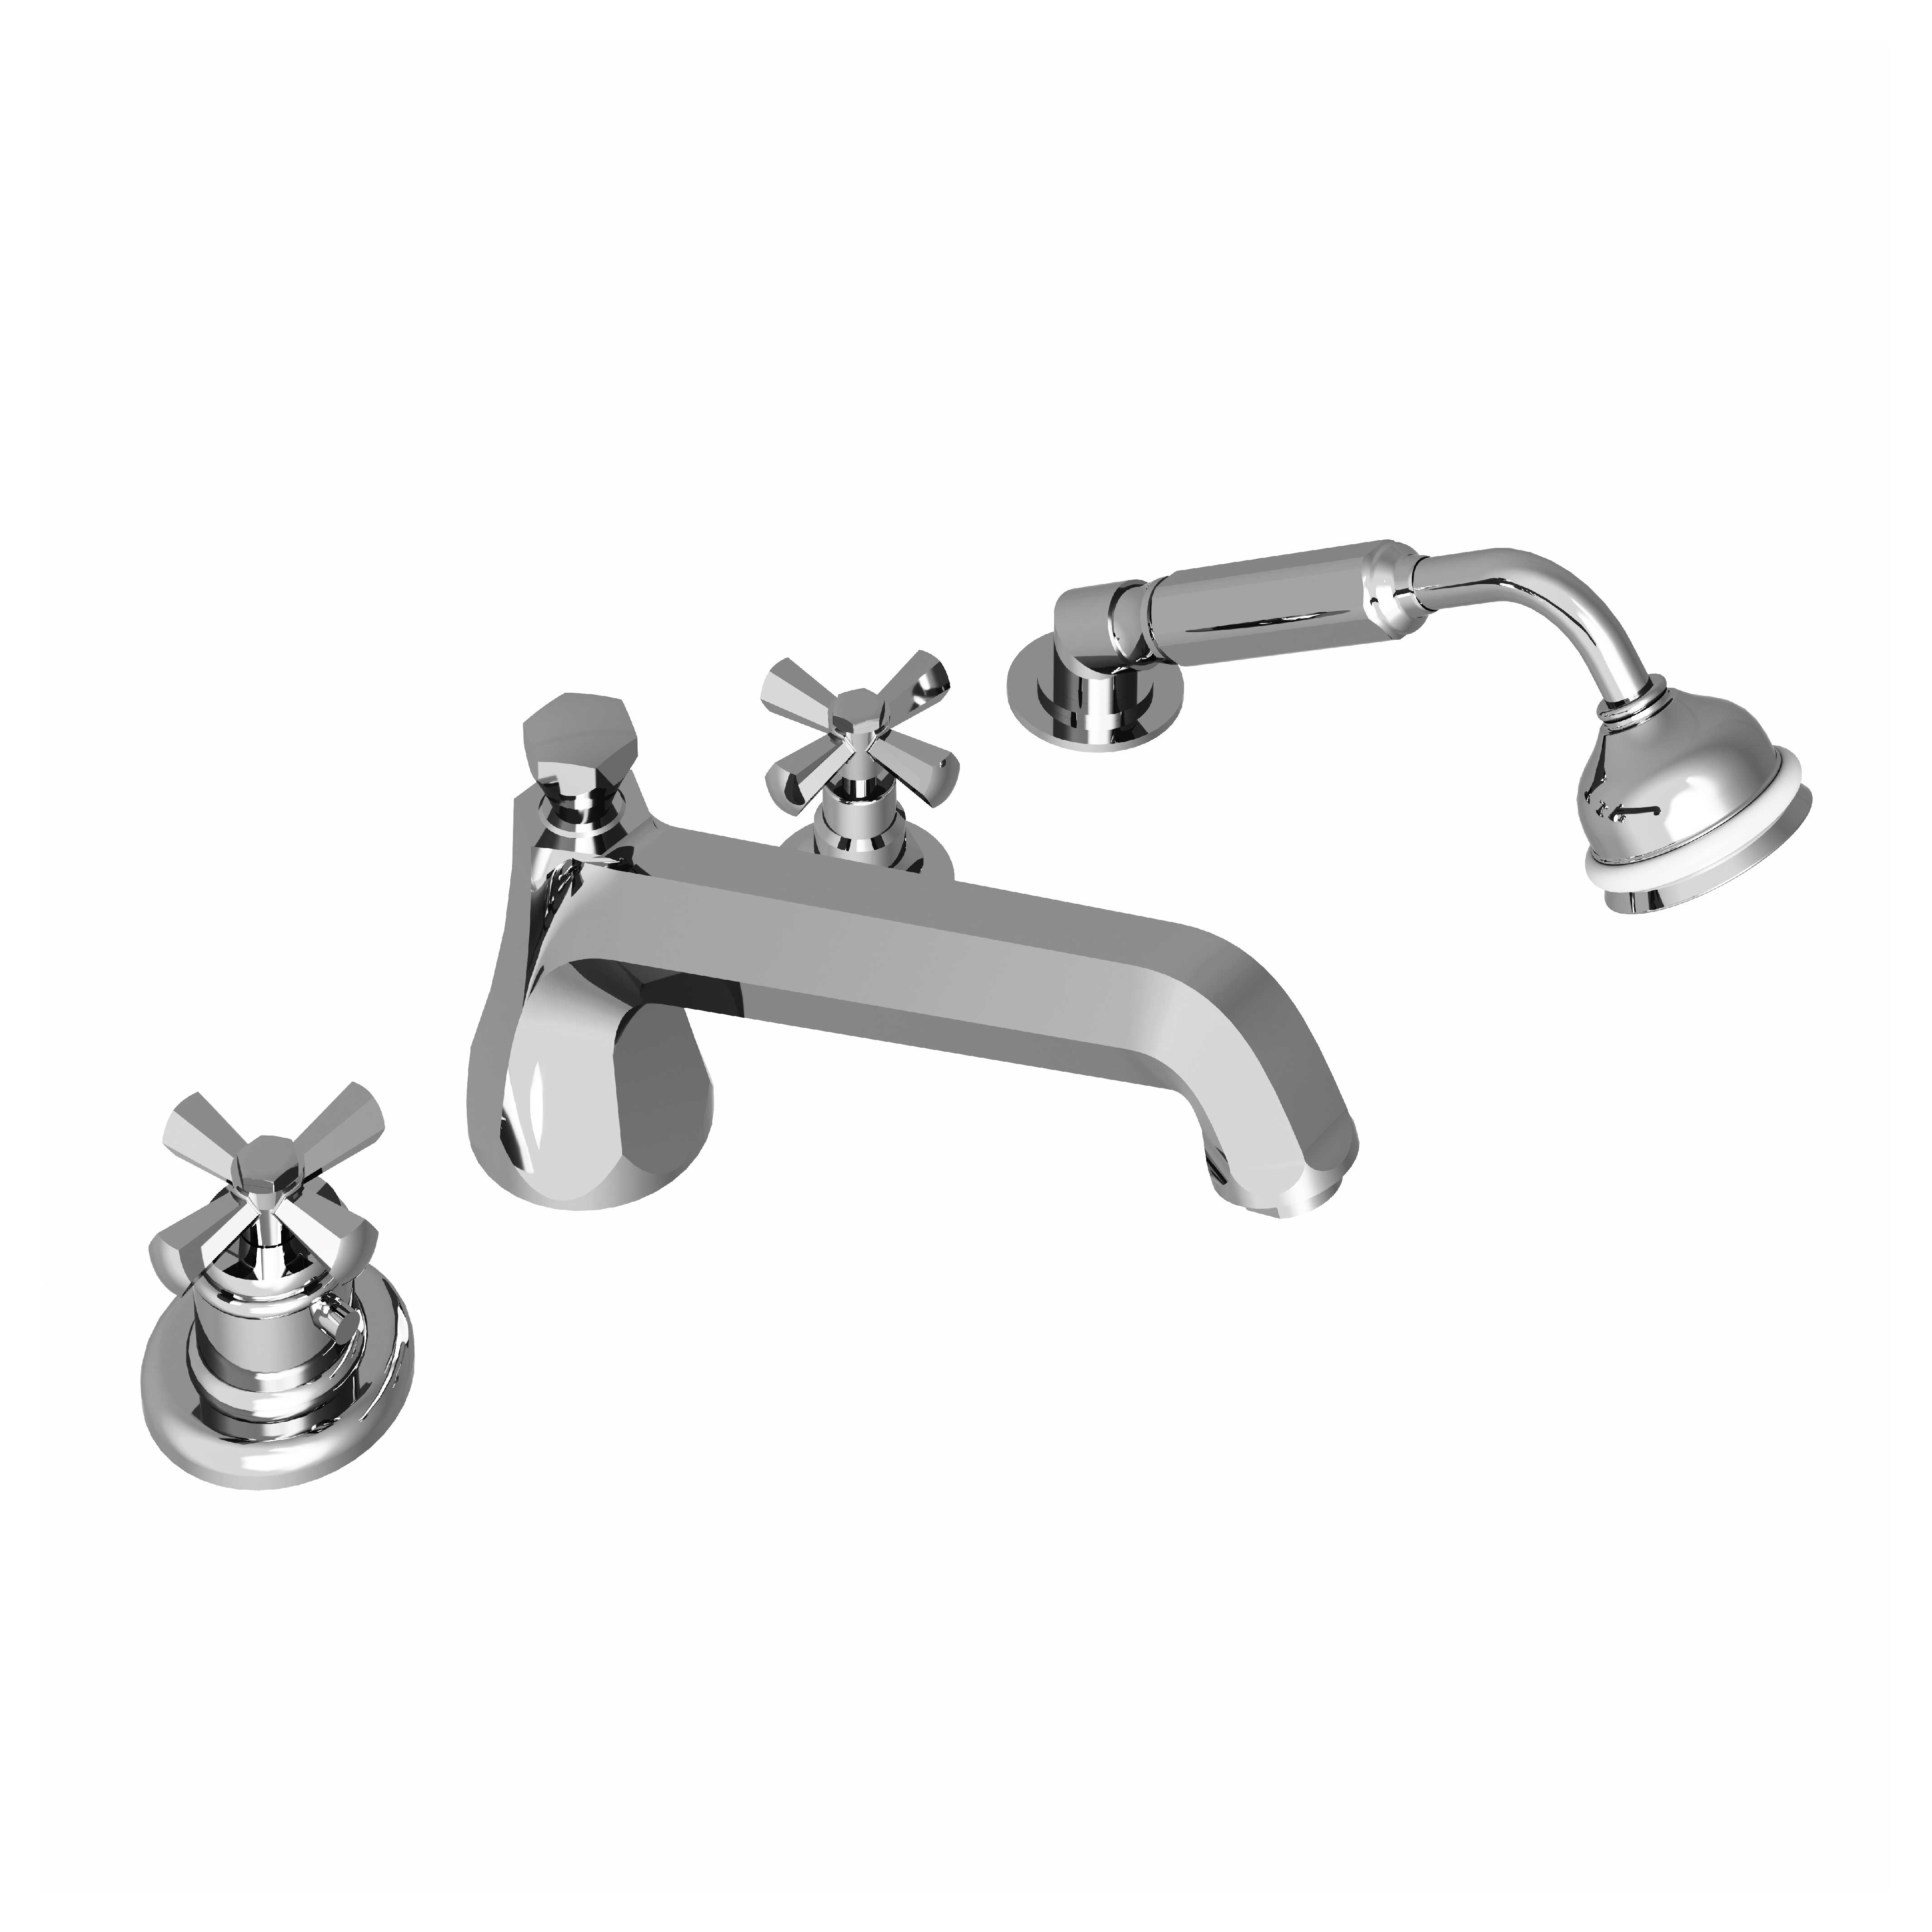 M38-3304TXL XL 4-hole bath and shower thermo. mixer